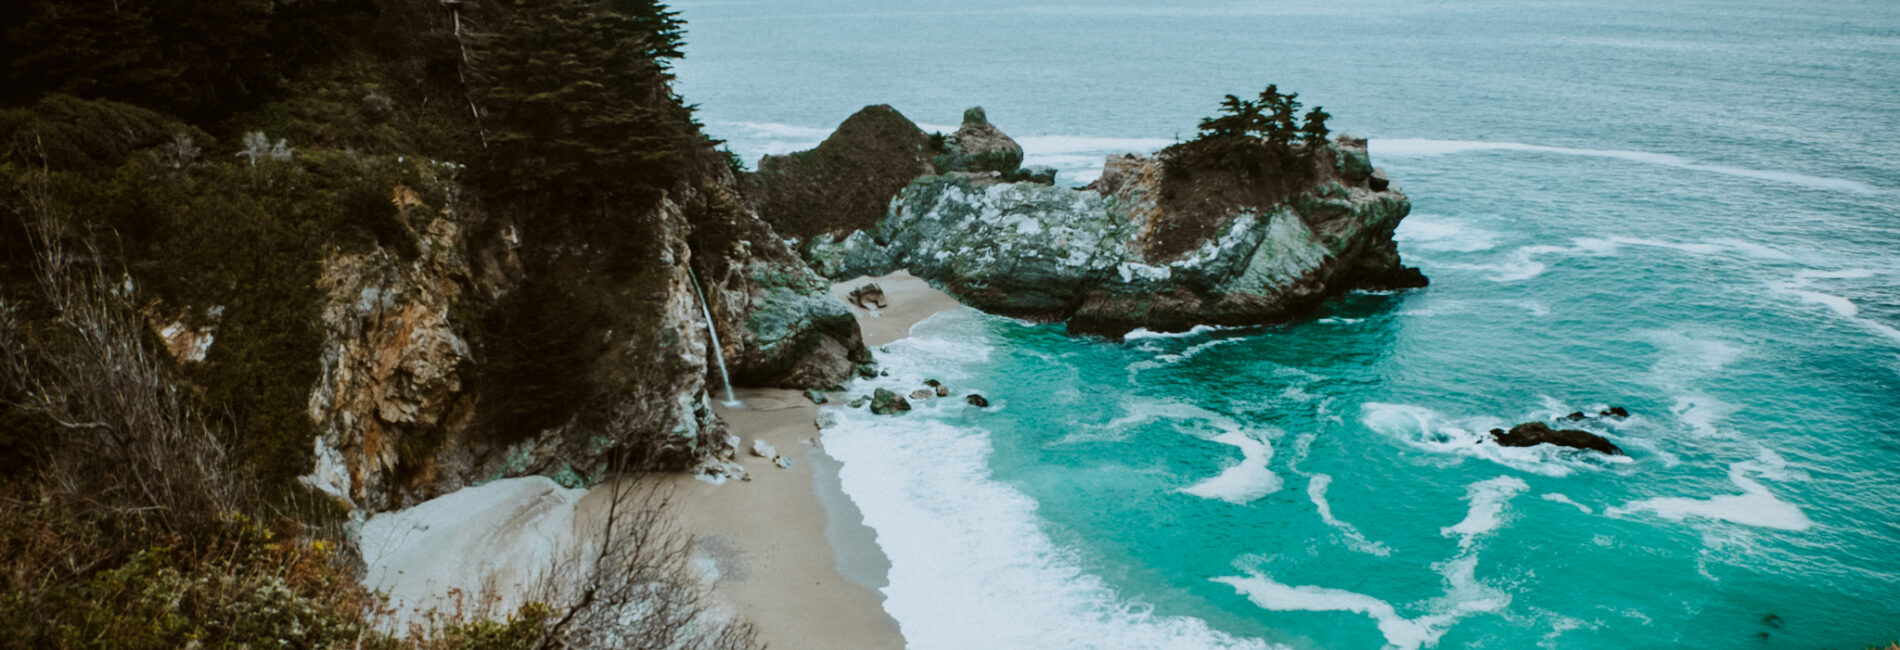 Road Trippin’ California: What To Do In Big Sur